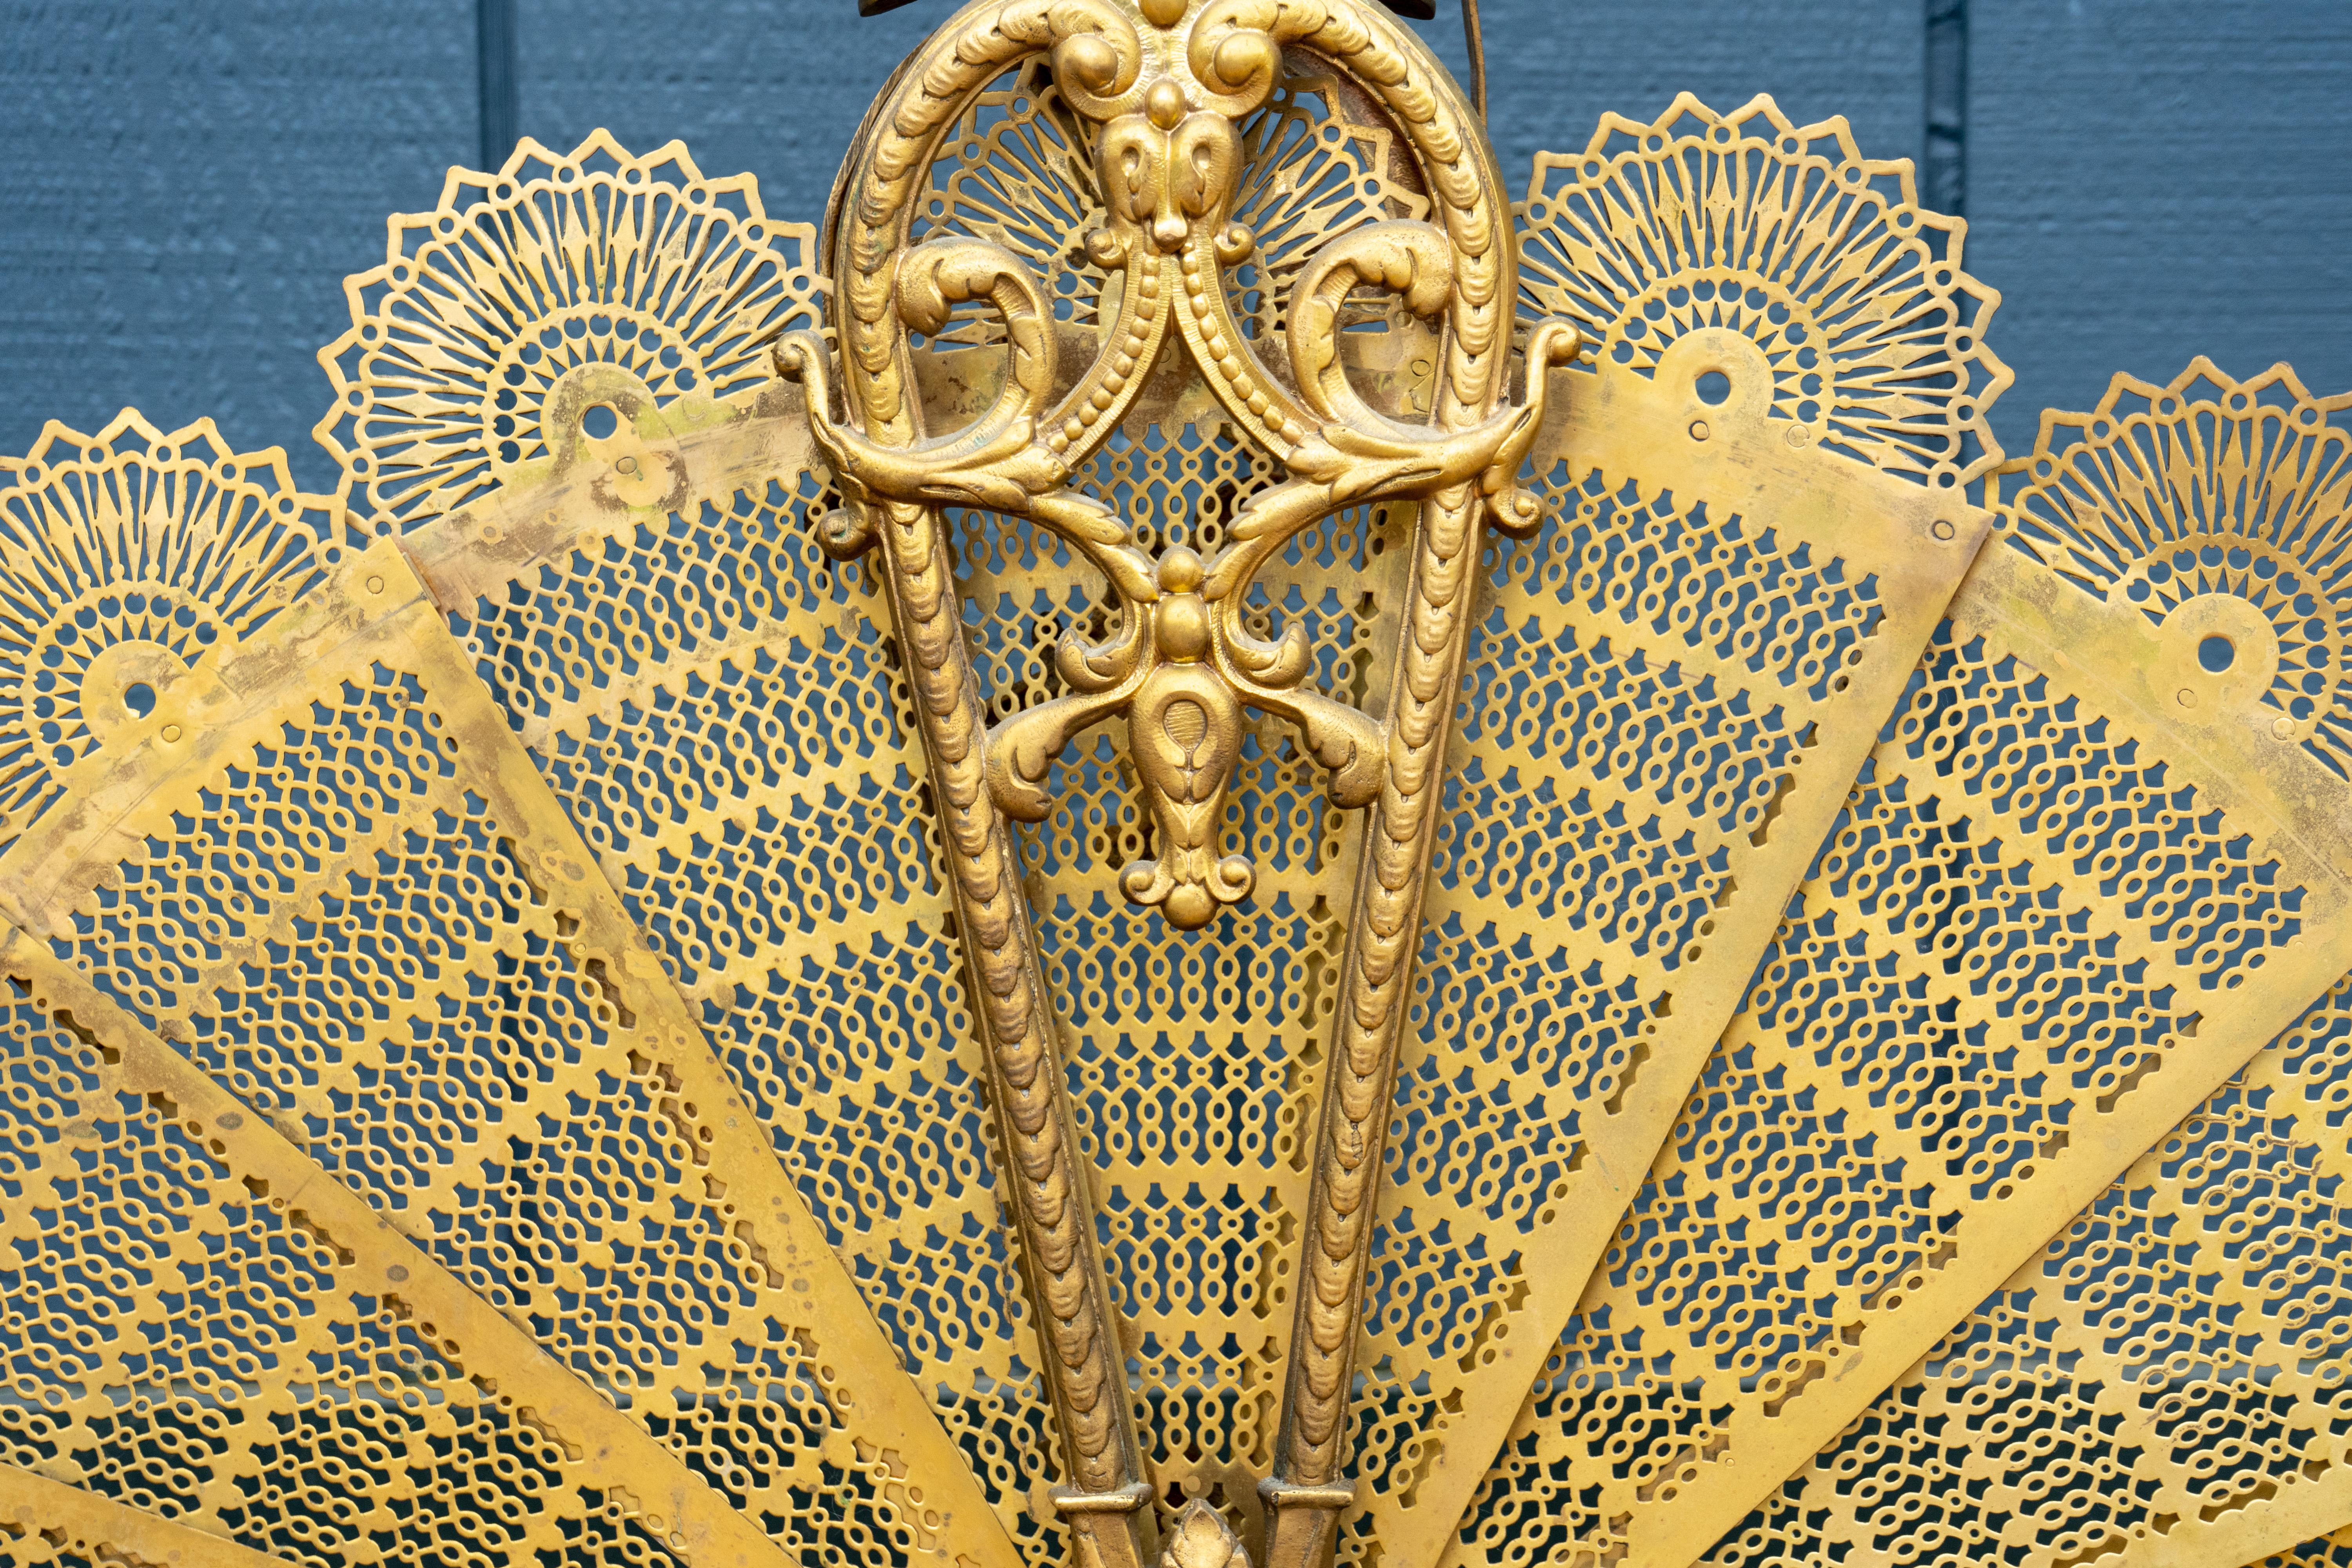 Enhance the opulence of your living space with this exquisite 19th century Gilt Fire Screen by renown Parisian metalsmith, Charles Casier, a masterful example of the Rococo style. Crafted with meticulous attention to detail, this fire screen is